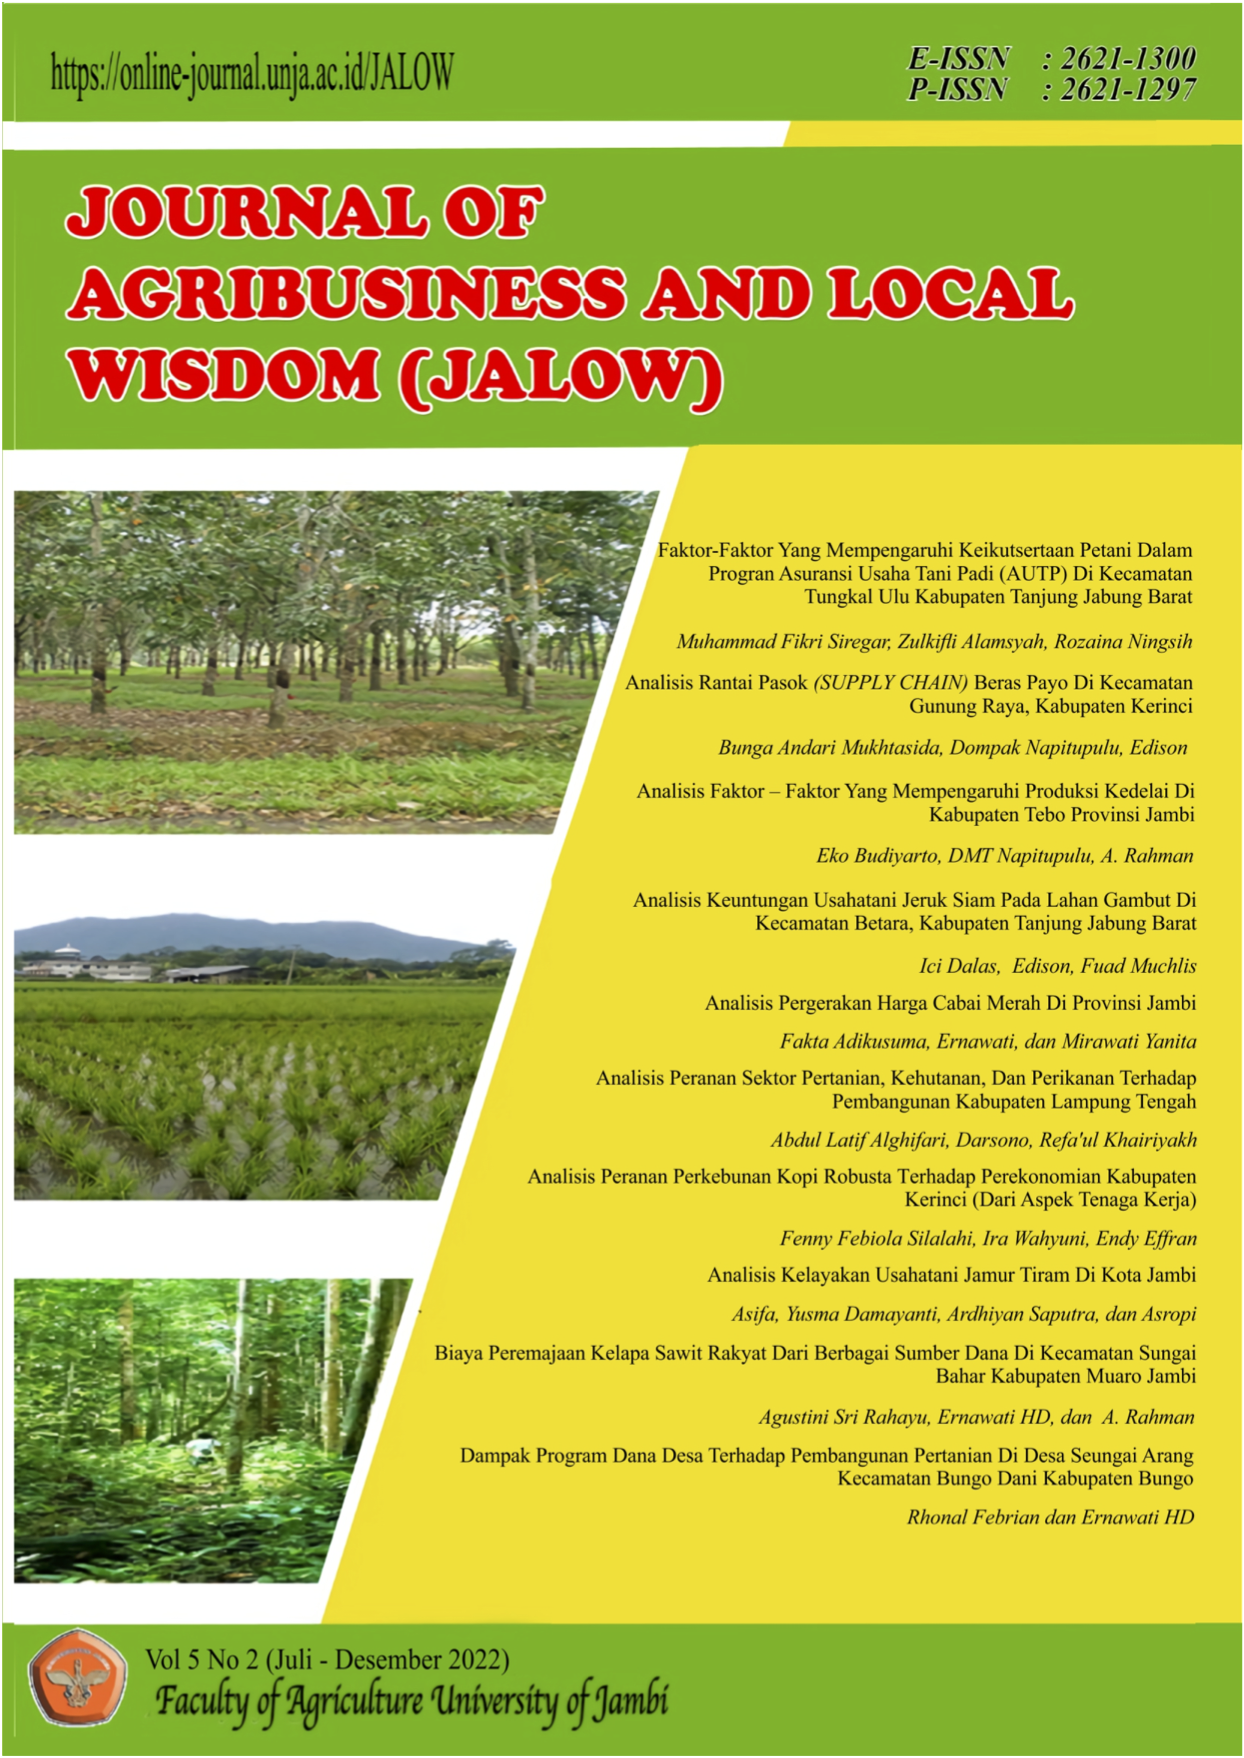 					View Vol. 5 No. 2 (2022): Journal Agribusiness and Local Wisdom
				